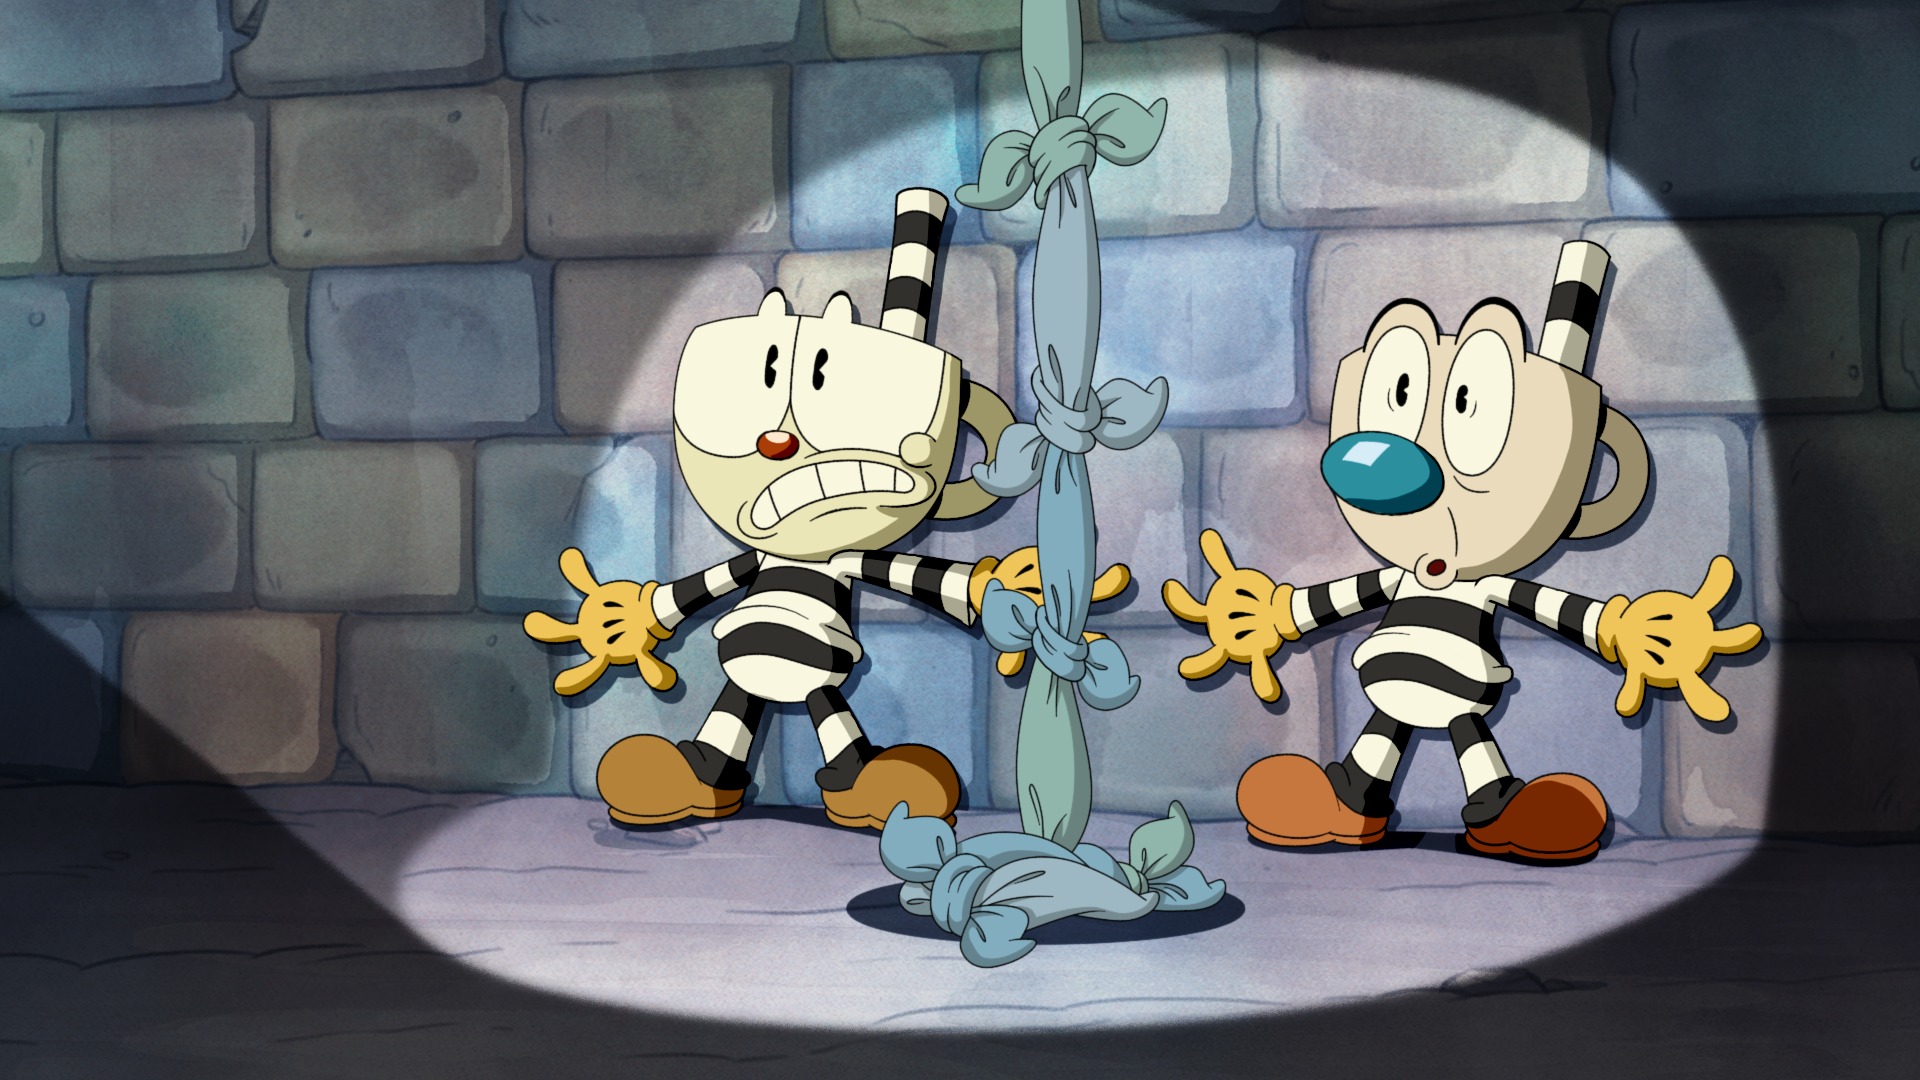 The Cuphead Show on X: My fans, you've won two tickets to watch the new Cuphead  Show, who are you bringing? Careful though, unless those souls are freed,  we may never get